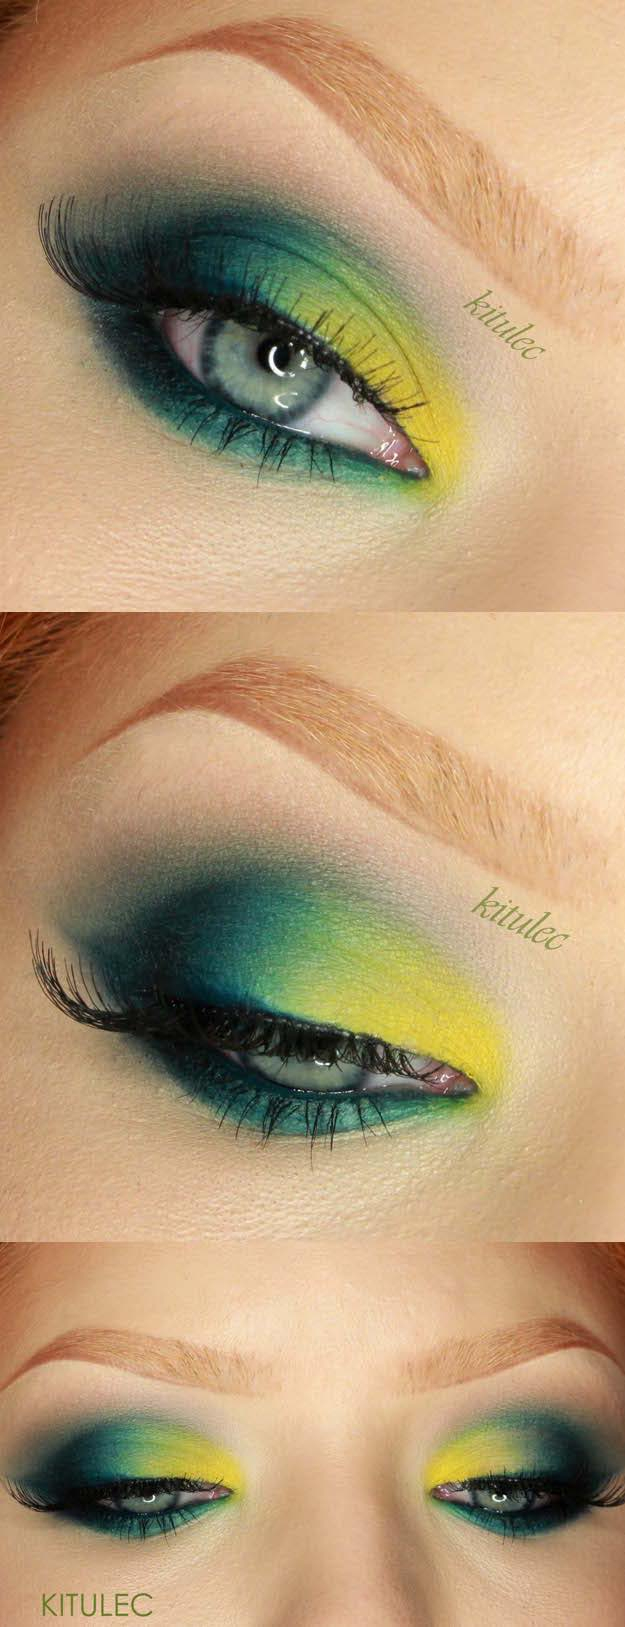 Natural Makeup Look For Green Eyes 50 Perfect Makeup Tutorials For Green Eyes The Goddess